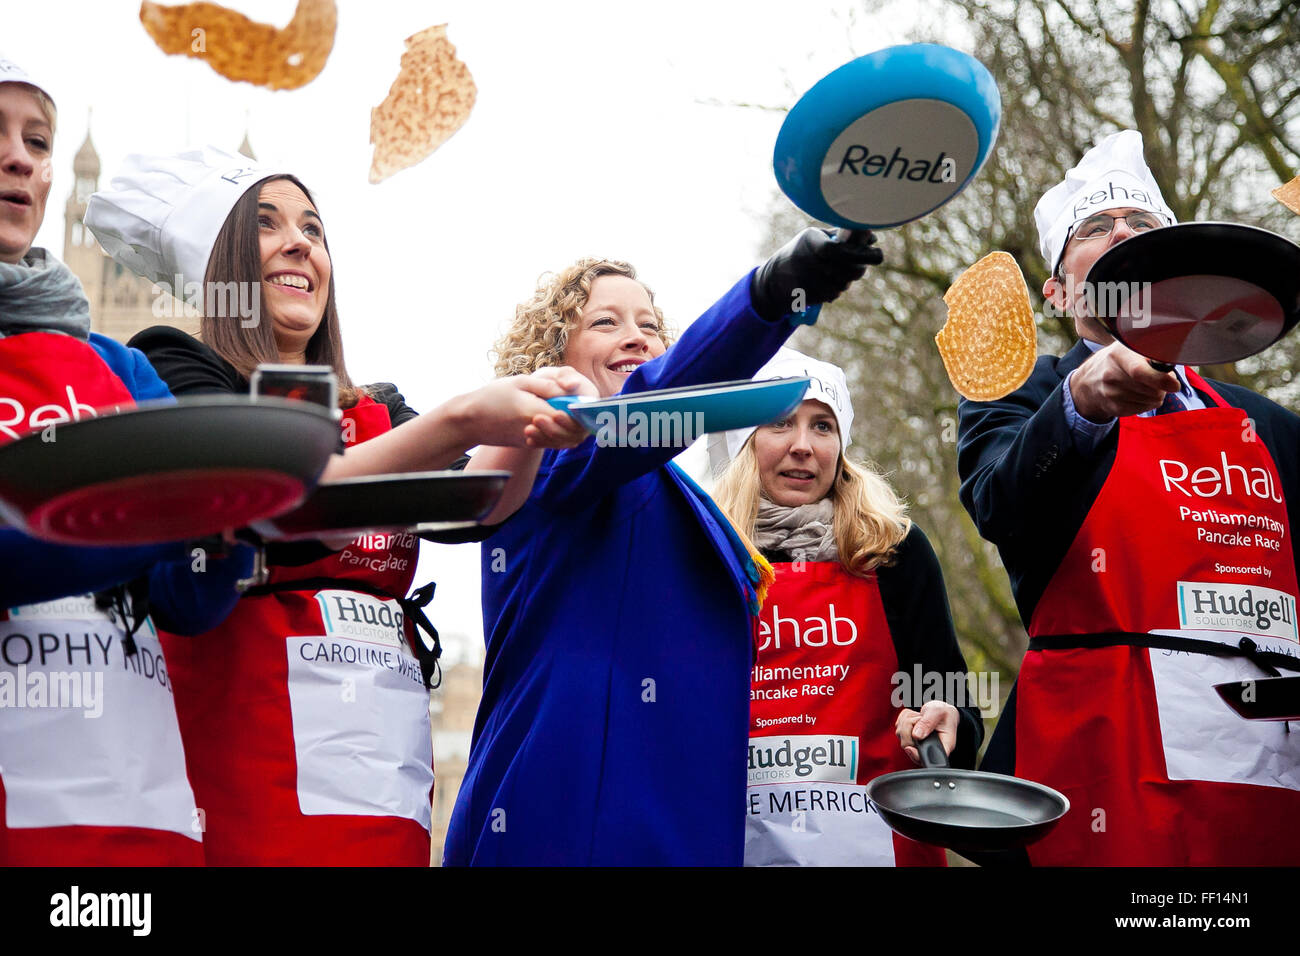 Westminster, London, United Kingdom. February 9th, 2016 -  The media team - last year's winners of the annual Parliamentary pancake race pose for photos while tossing pancakes Credit:  Dinendra Haria/Alamy Live News Stock Photo